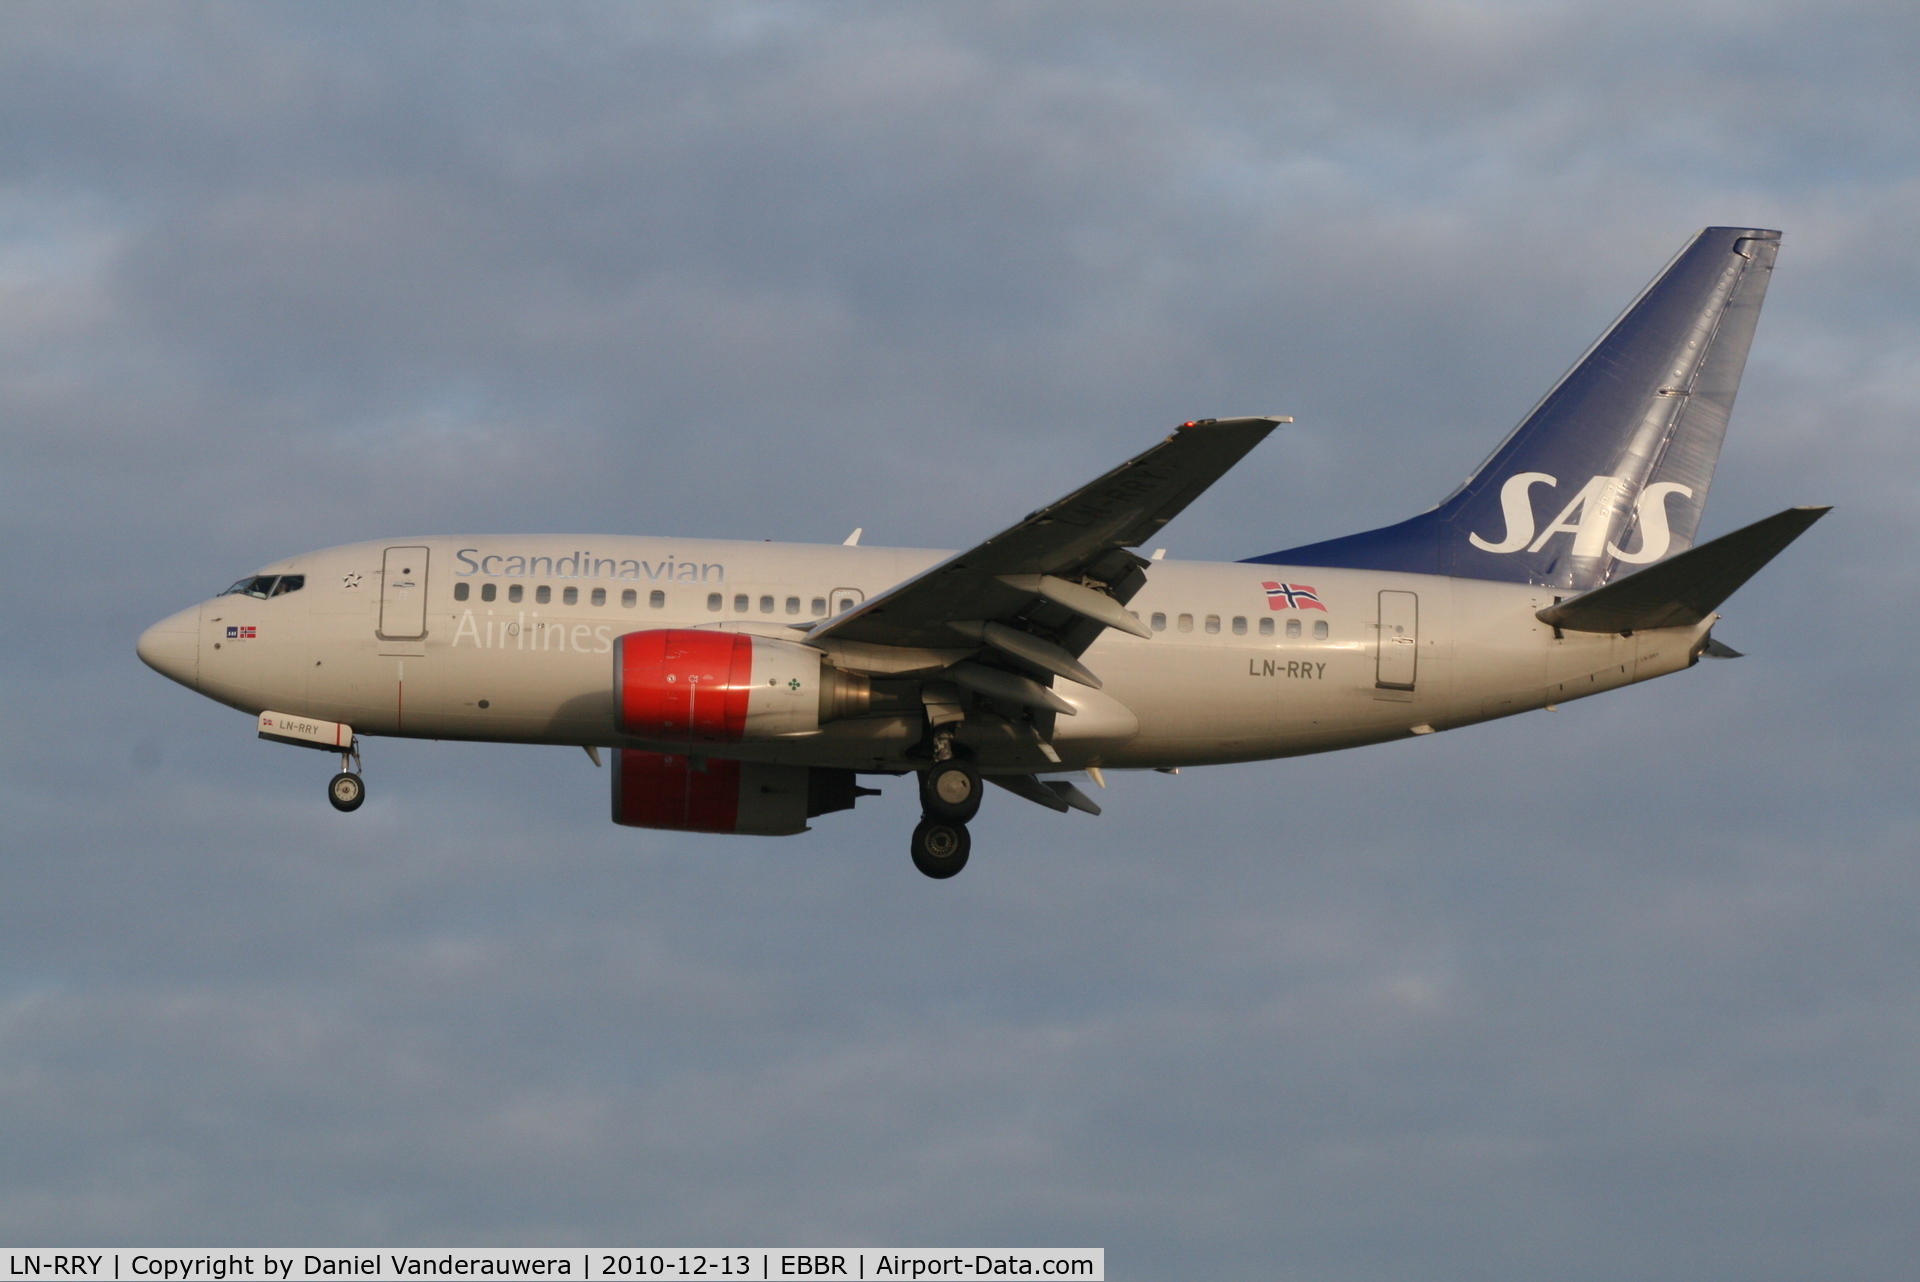 LN-RRY, 1998 Boeing 737-683 C/N 28297, Arrival of flight SK4743 to RWY 25L